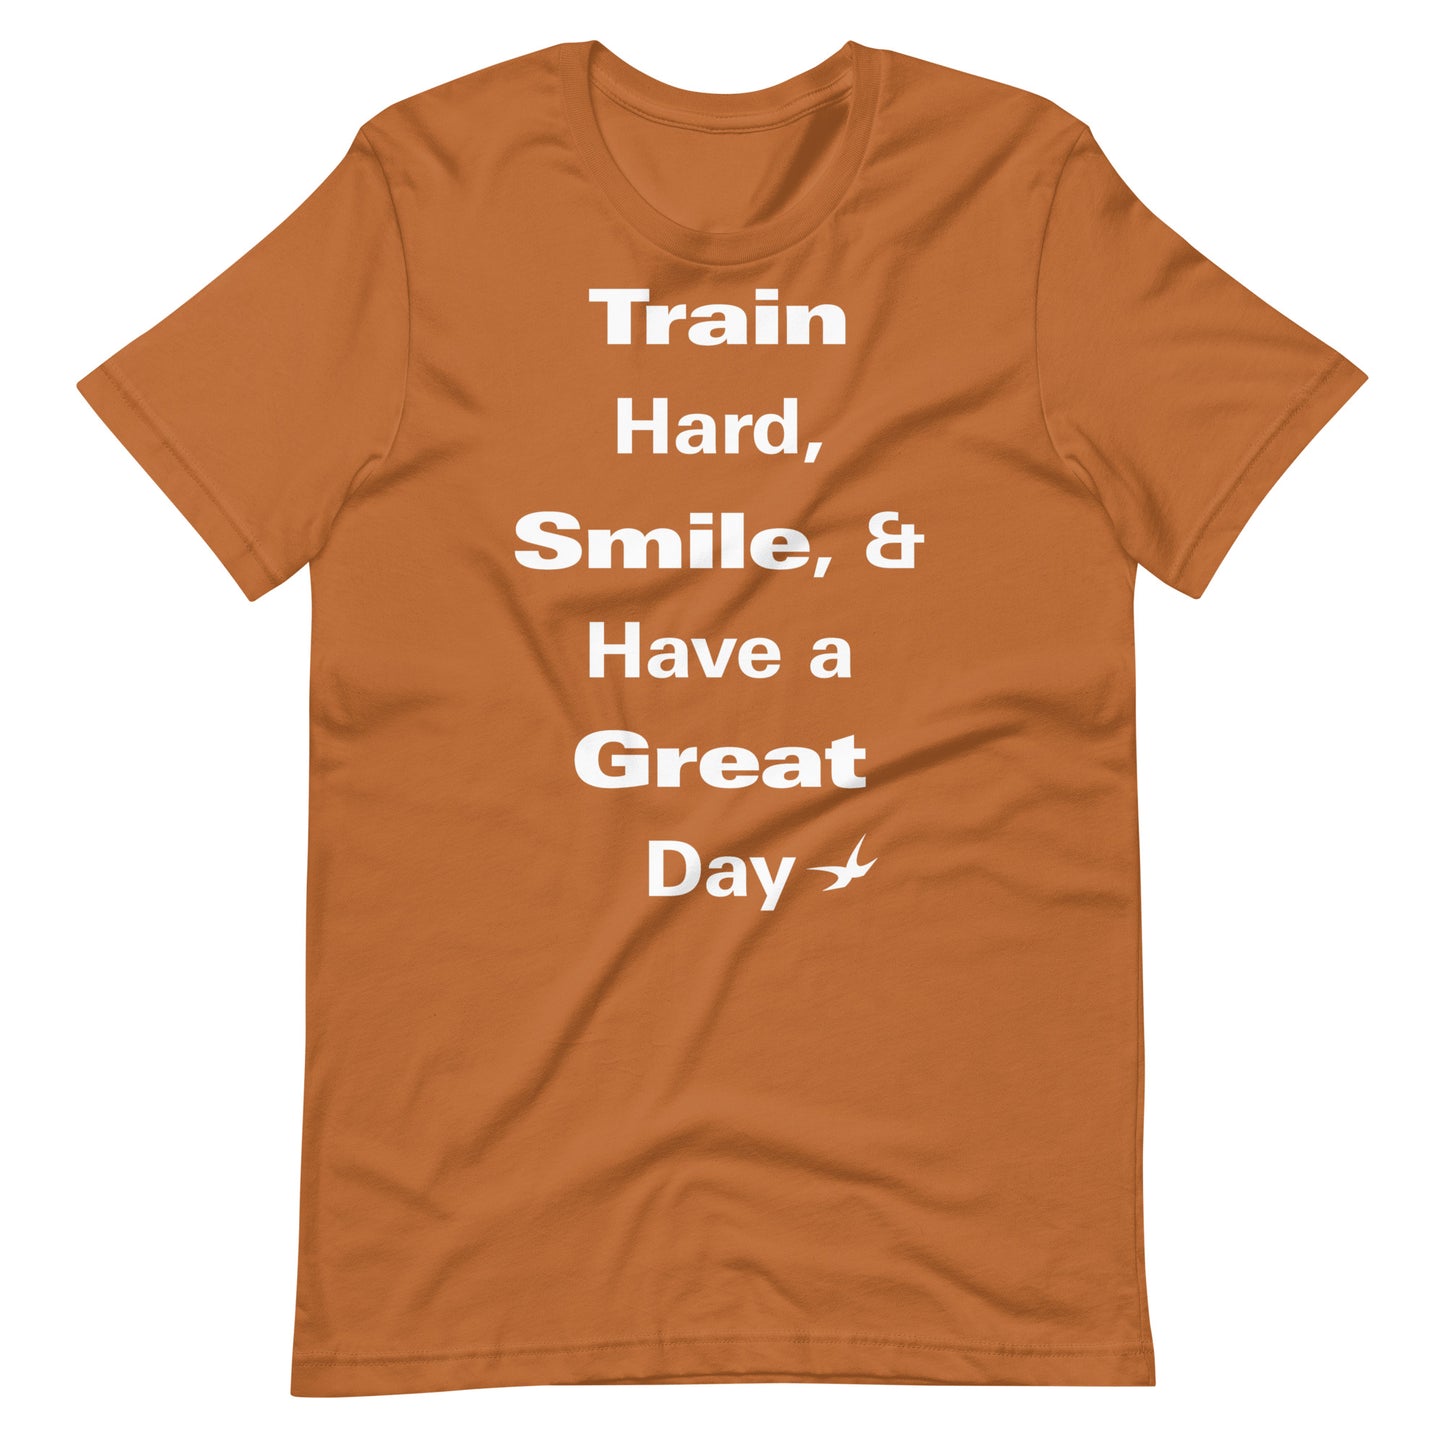 The Train Hard, Smile, and Have a Great Day Tee